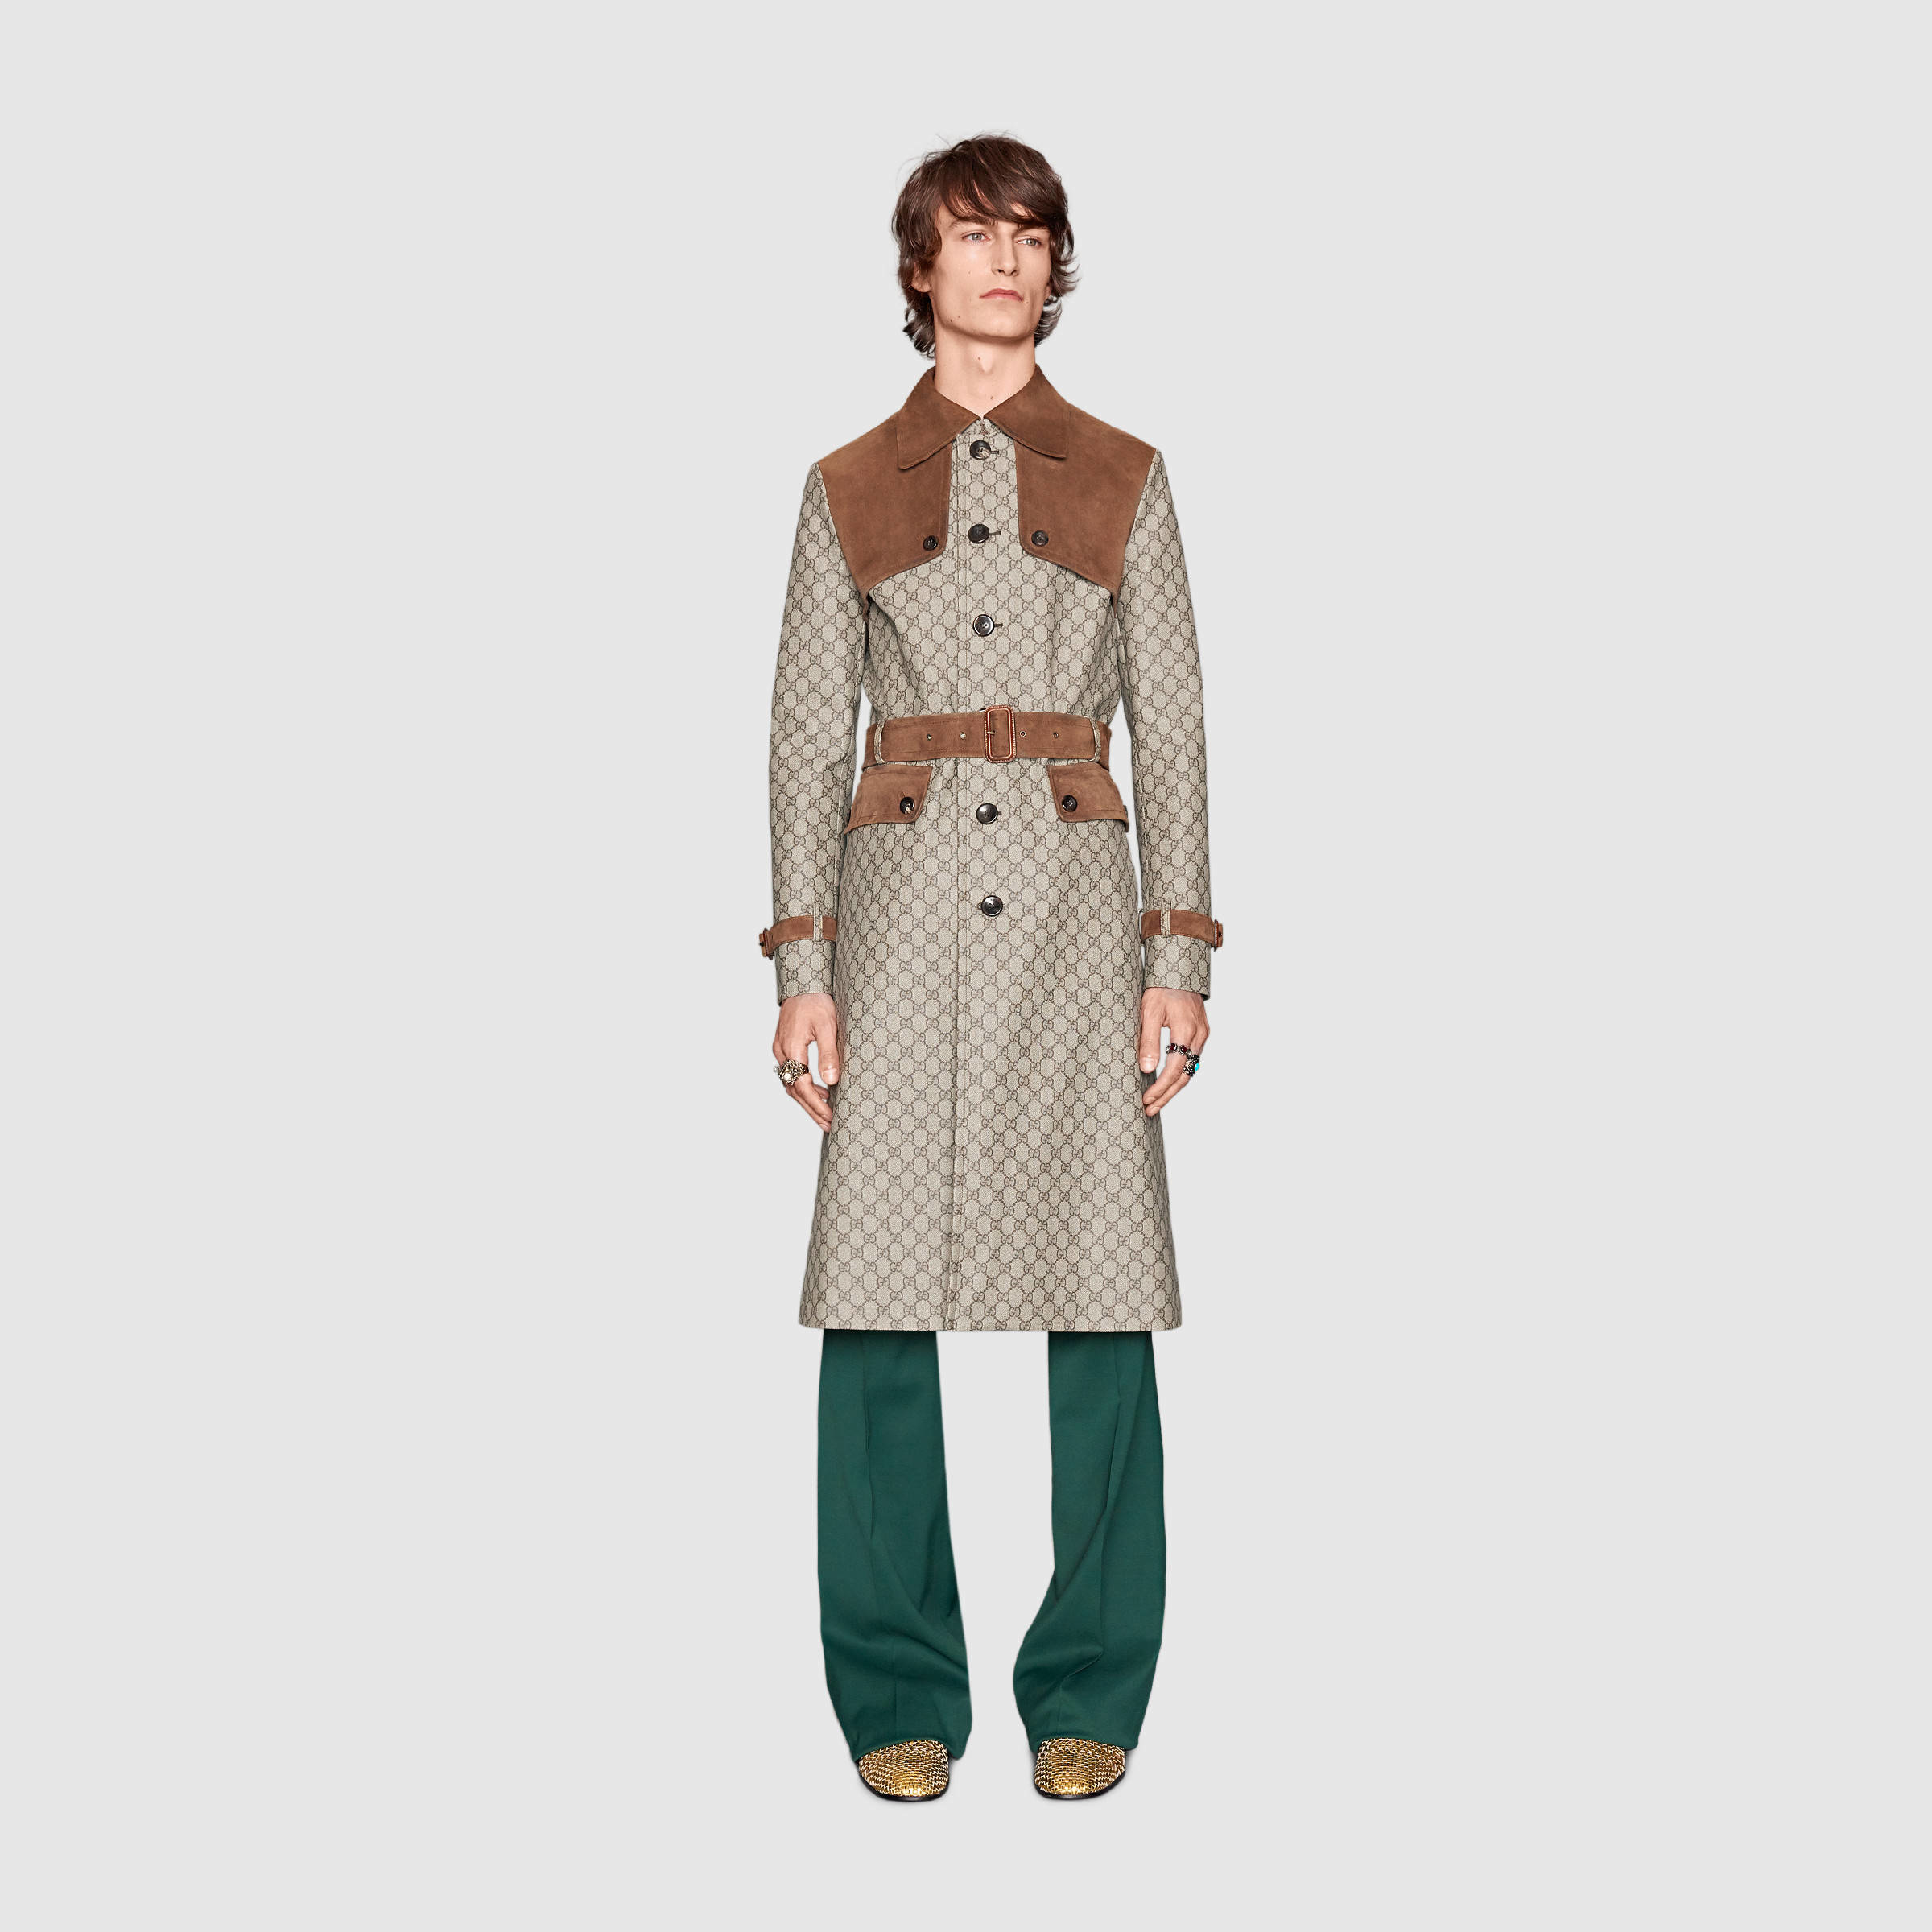 Gucci Canvas Gg Supreme Trench Coat for Men - Lyst